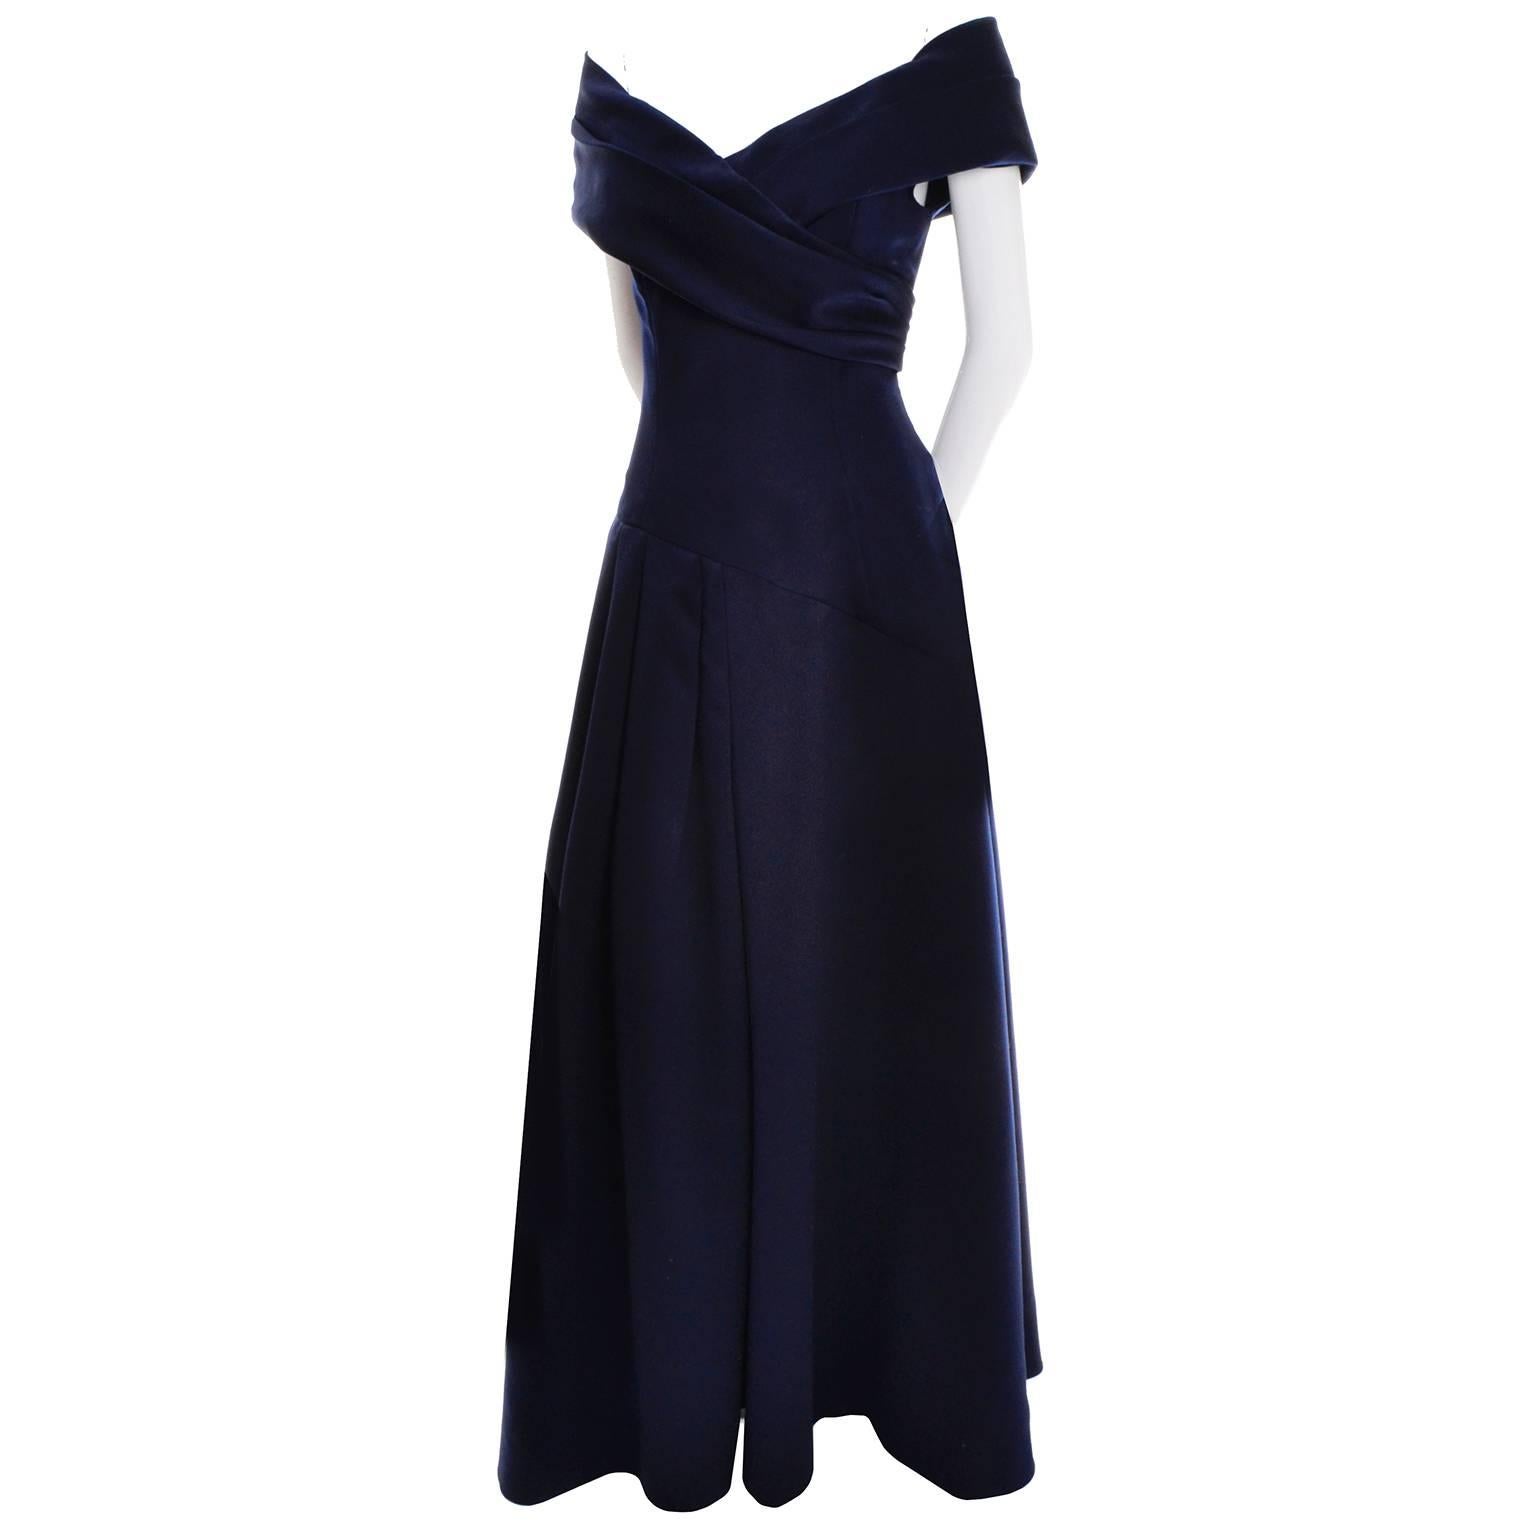 victor costa gown